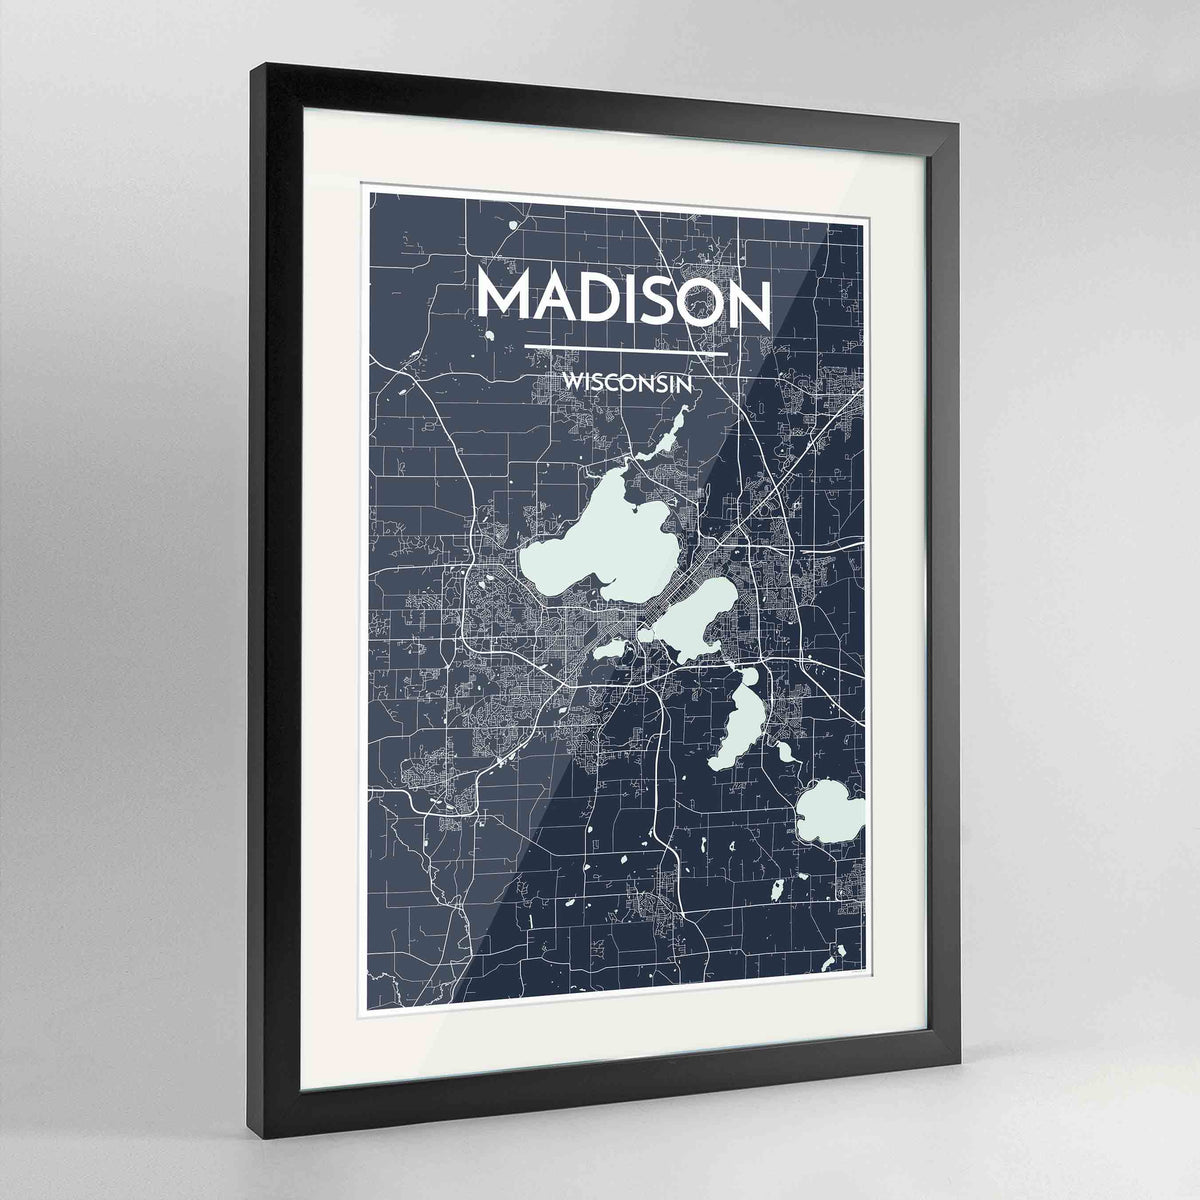 Framed Madison Map Art Print 24x36&quot; Contemporary Black frame Point Two Design Group